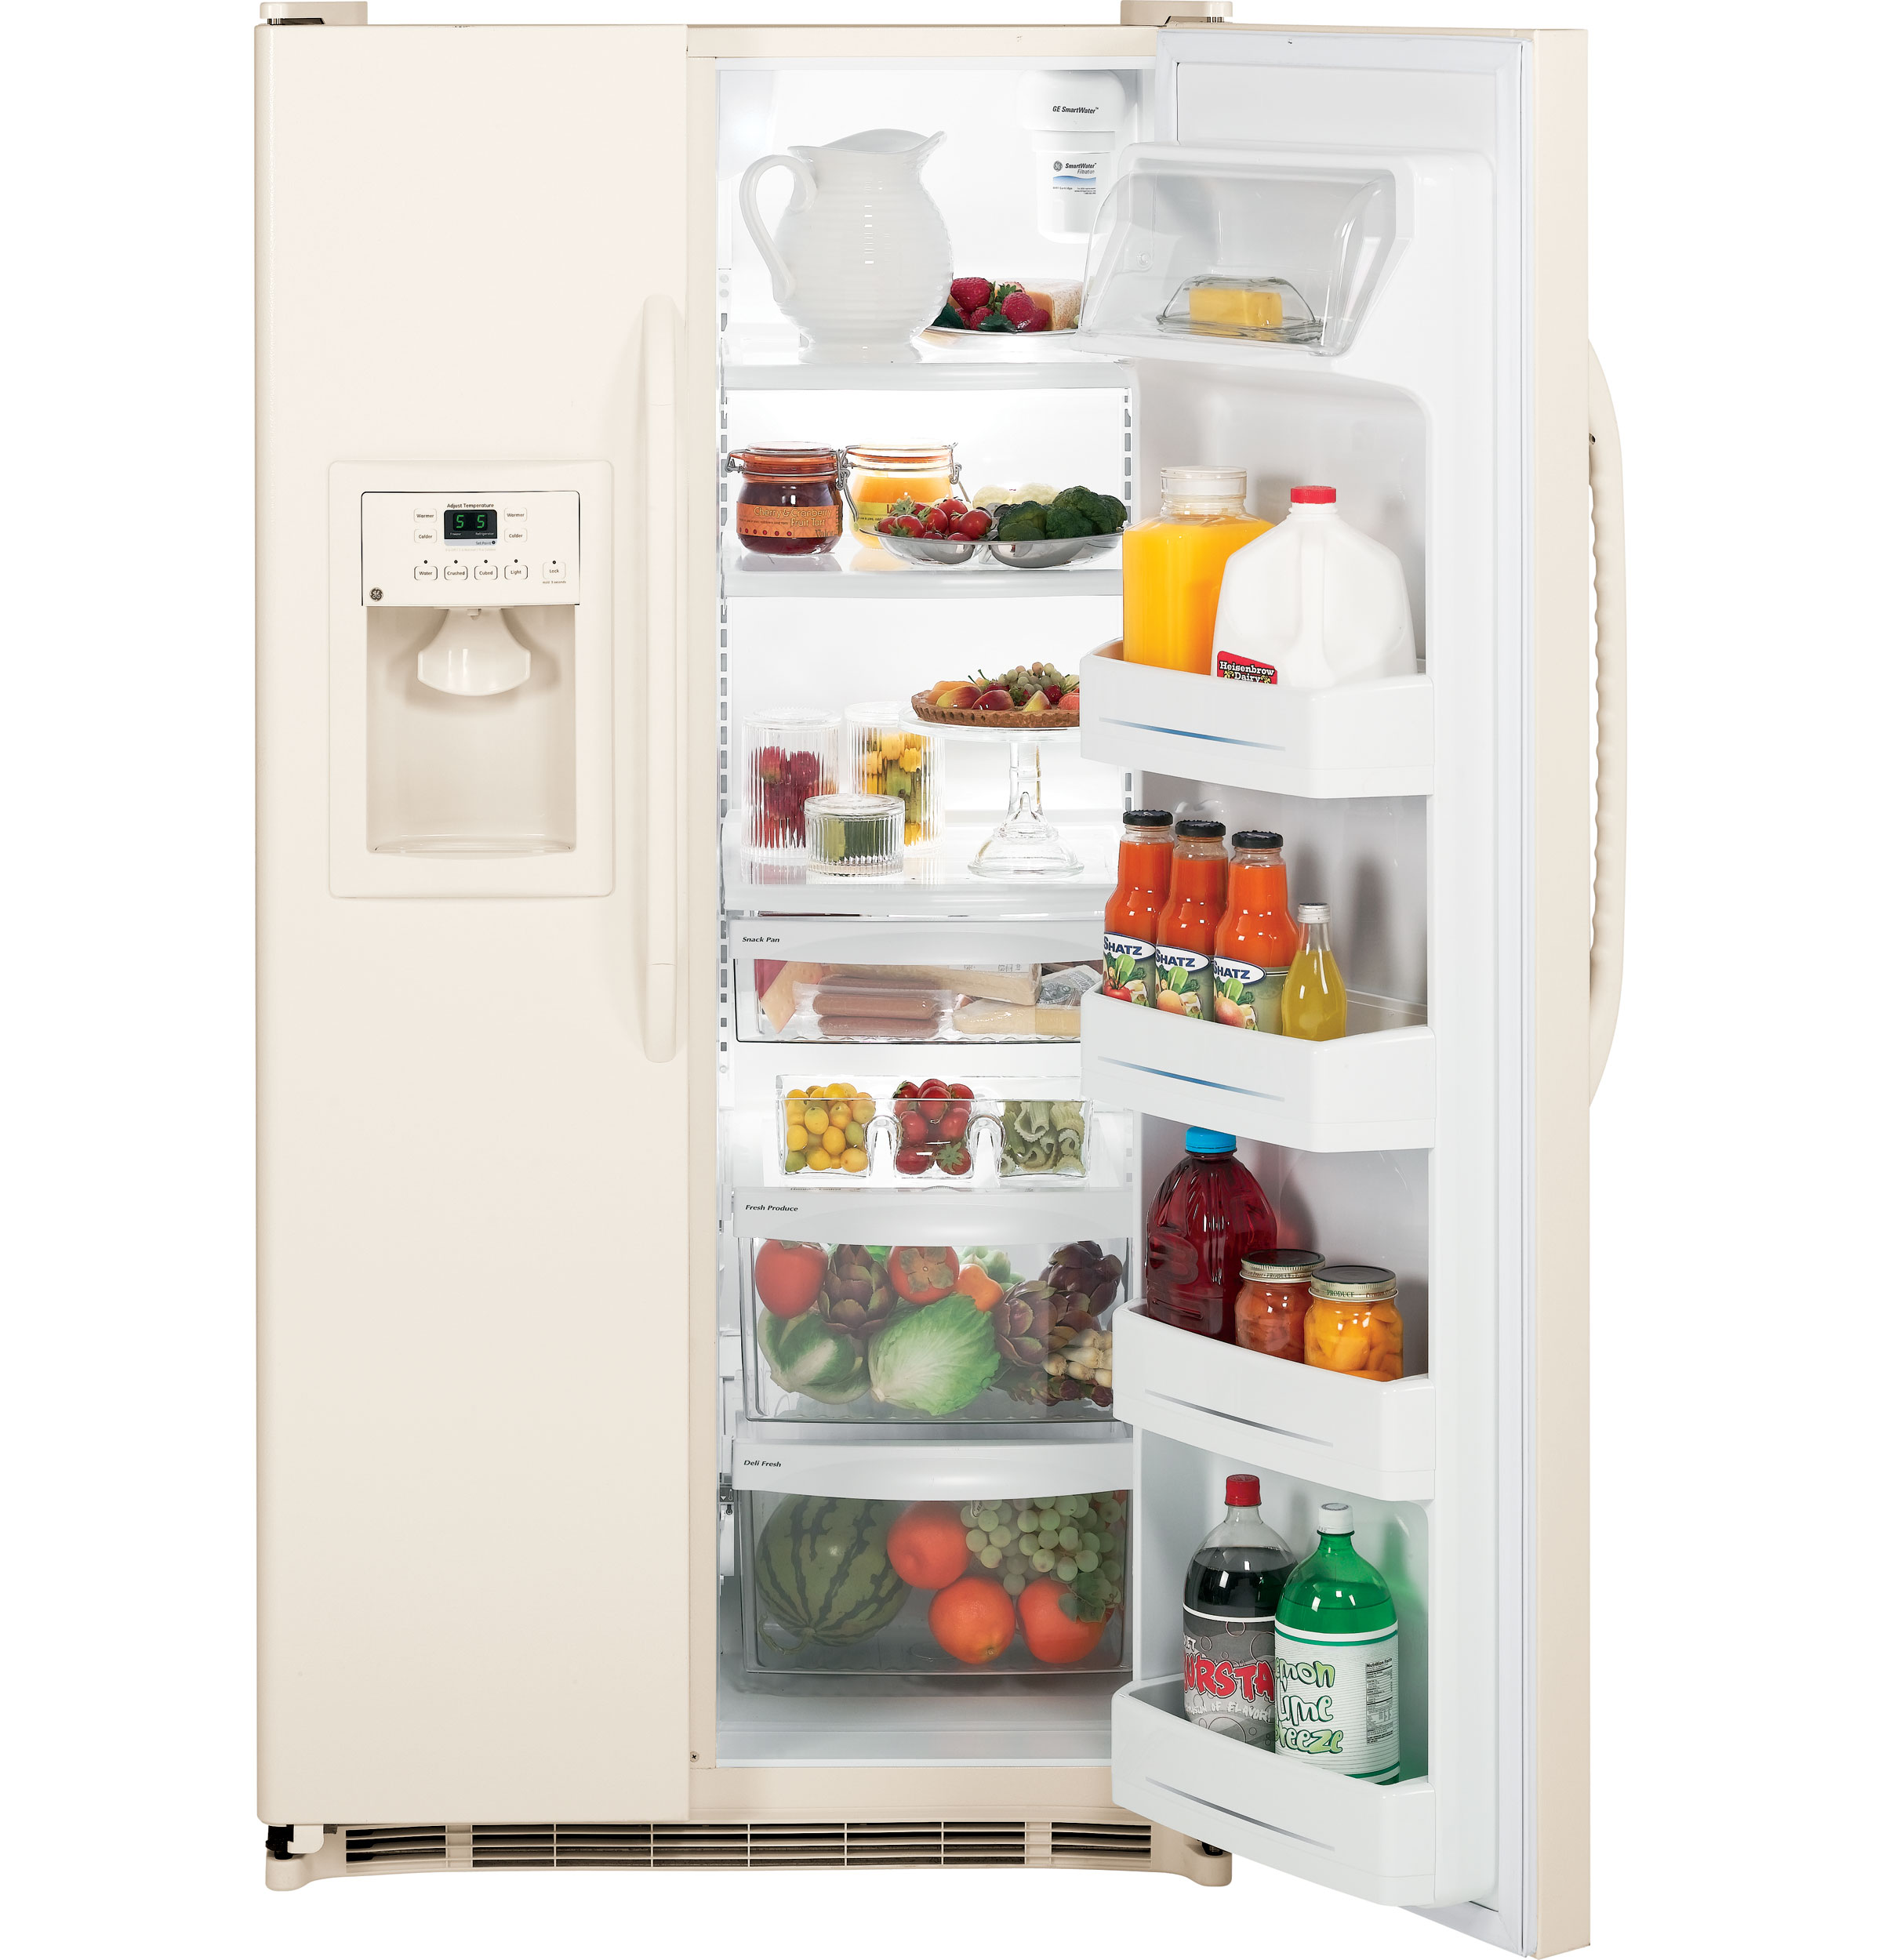 GE® ENERGY STAR® 25.3 Cu. Ft. Side-By-Side Refrigerator with Dispenser